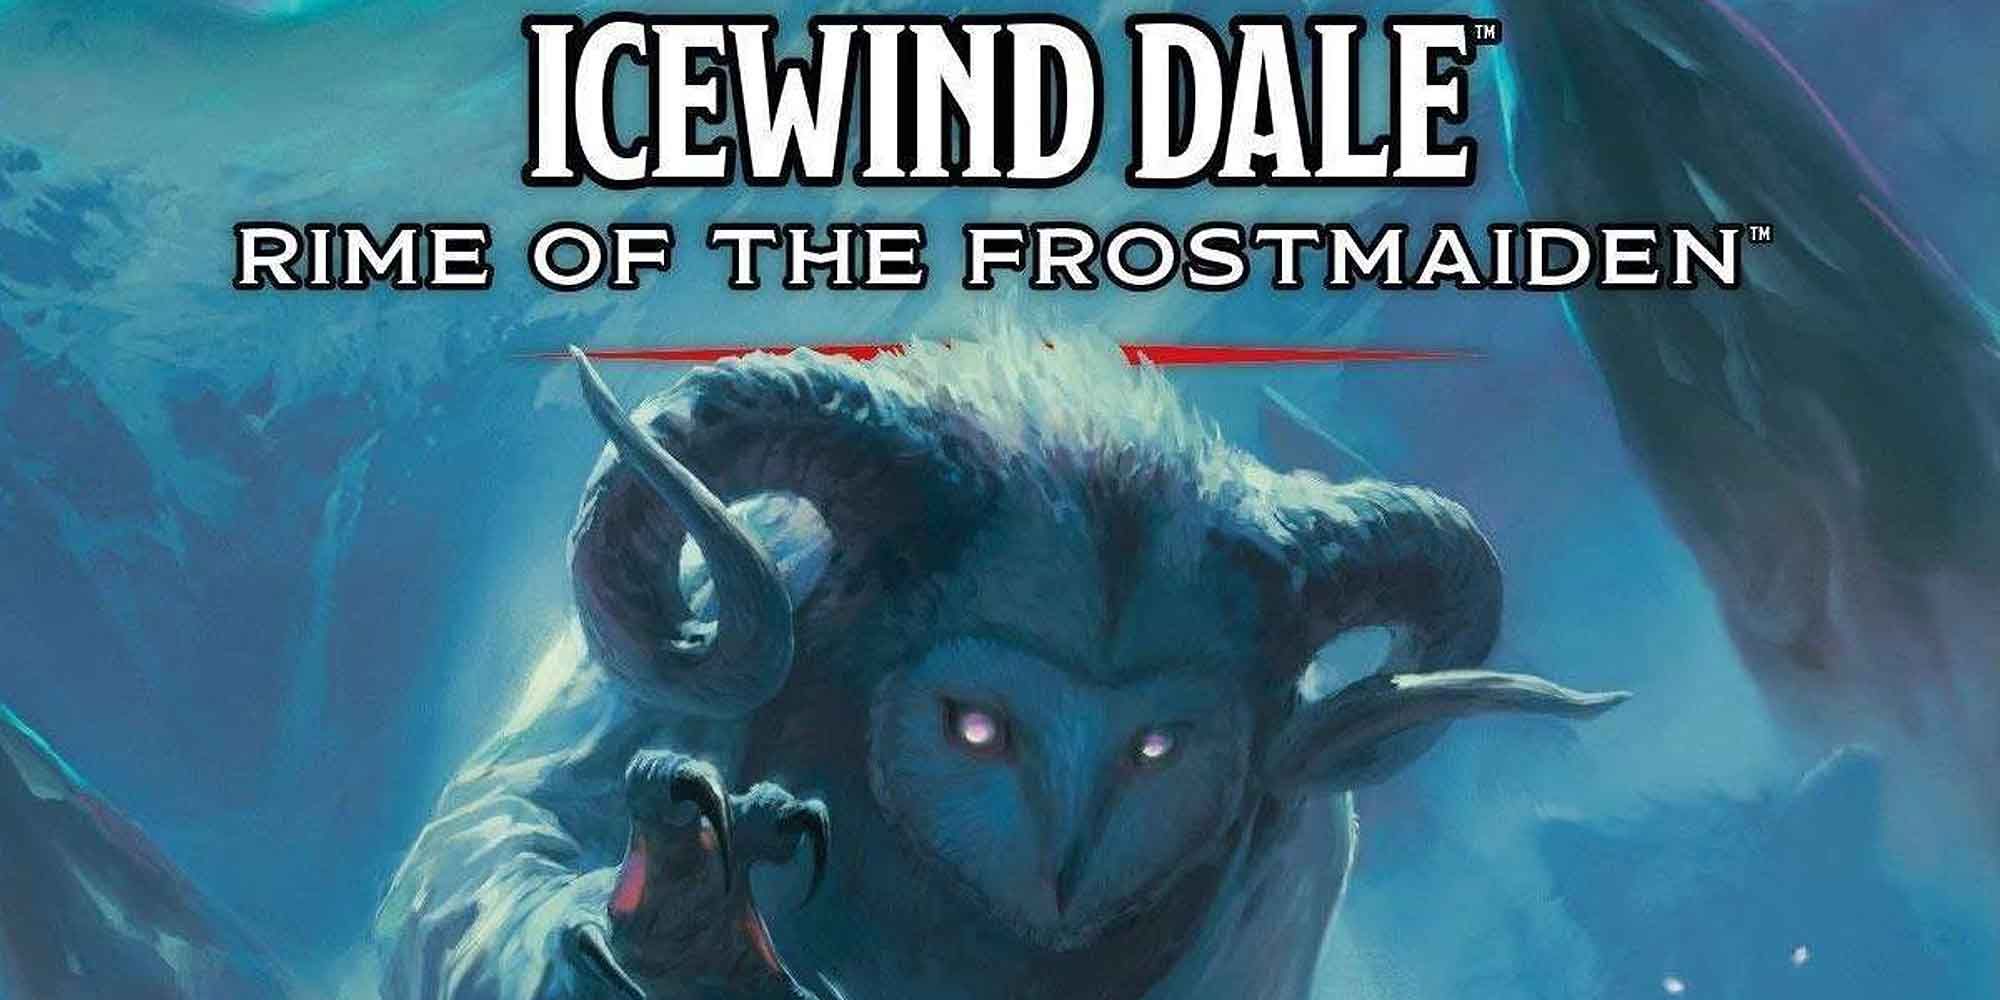 Rime of the Frostmaiden D&D campaign book